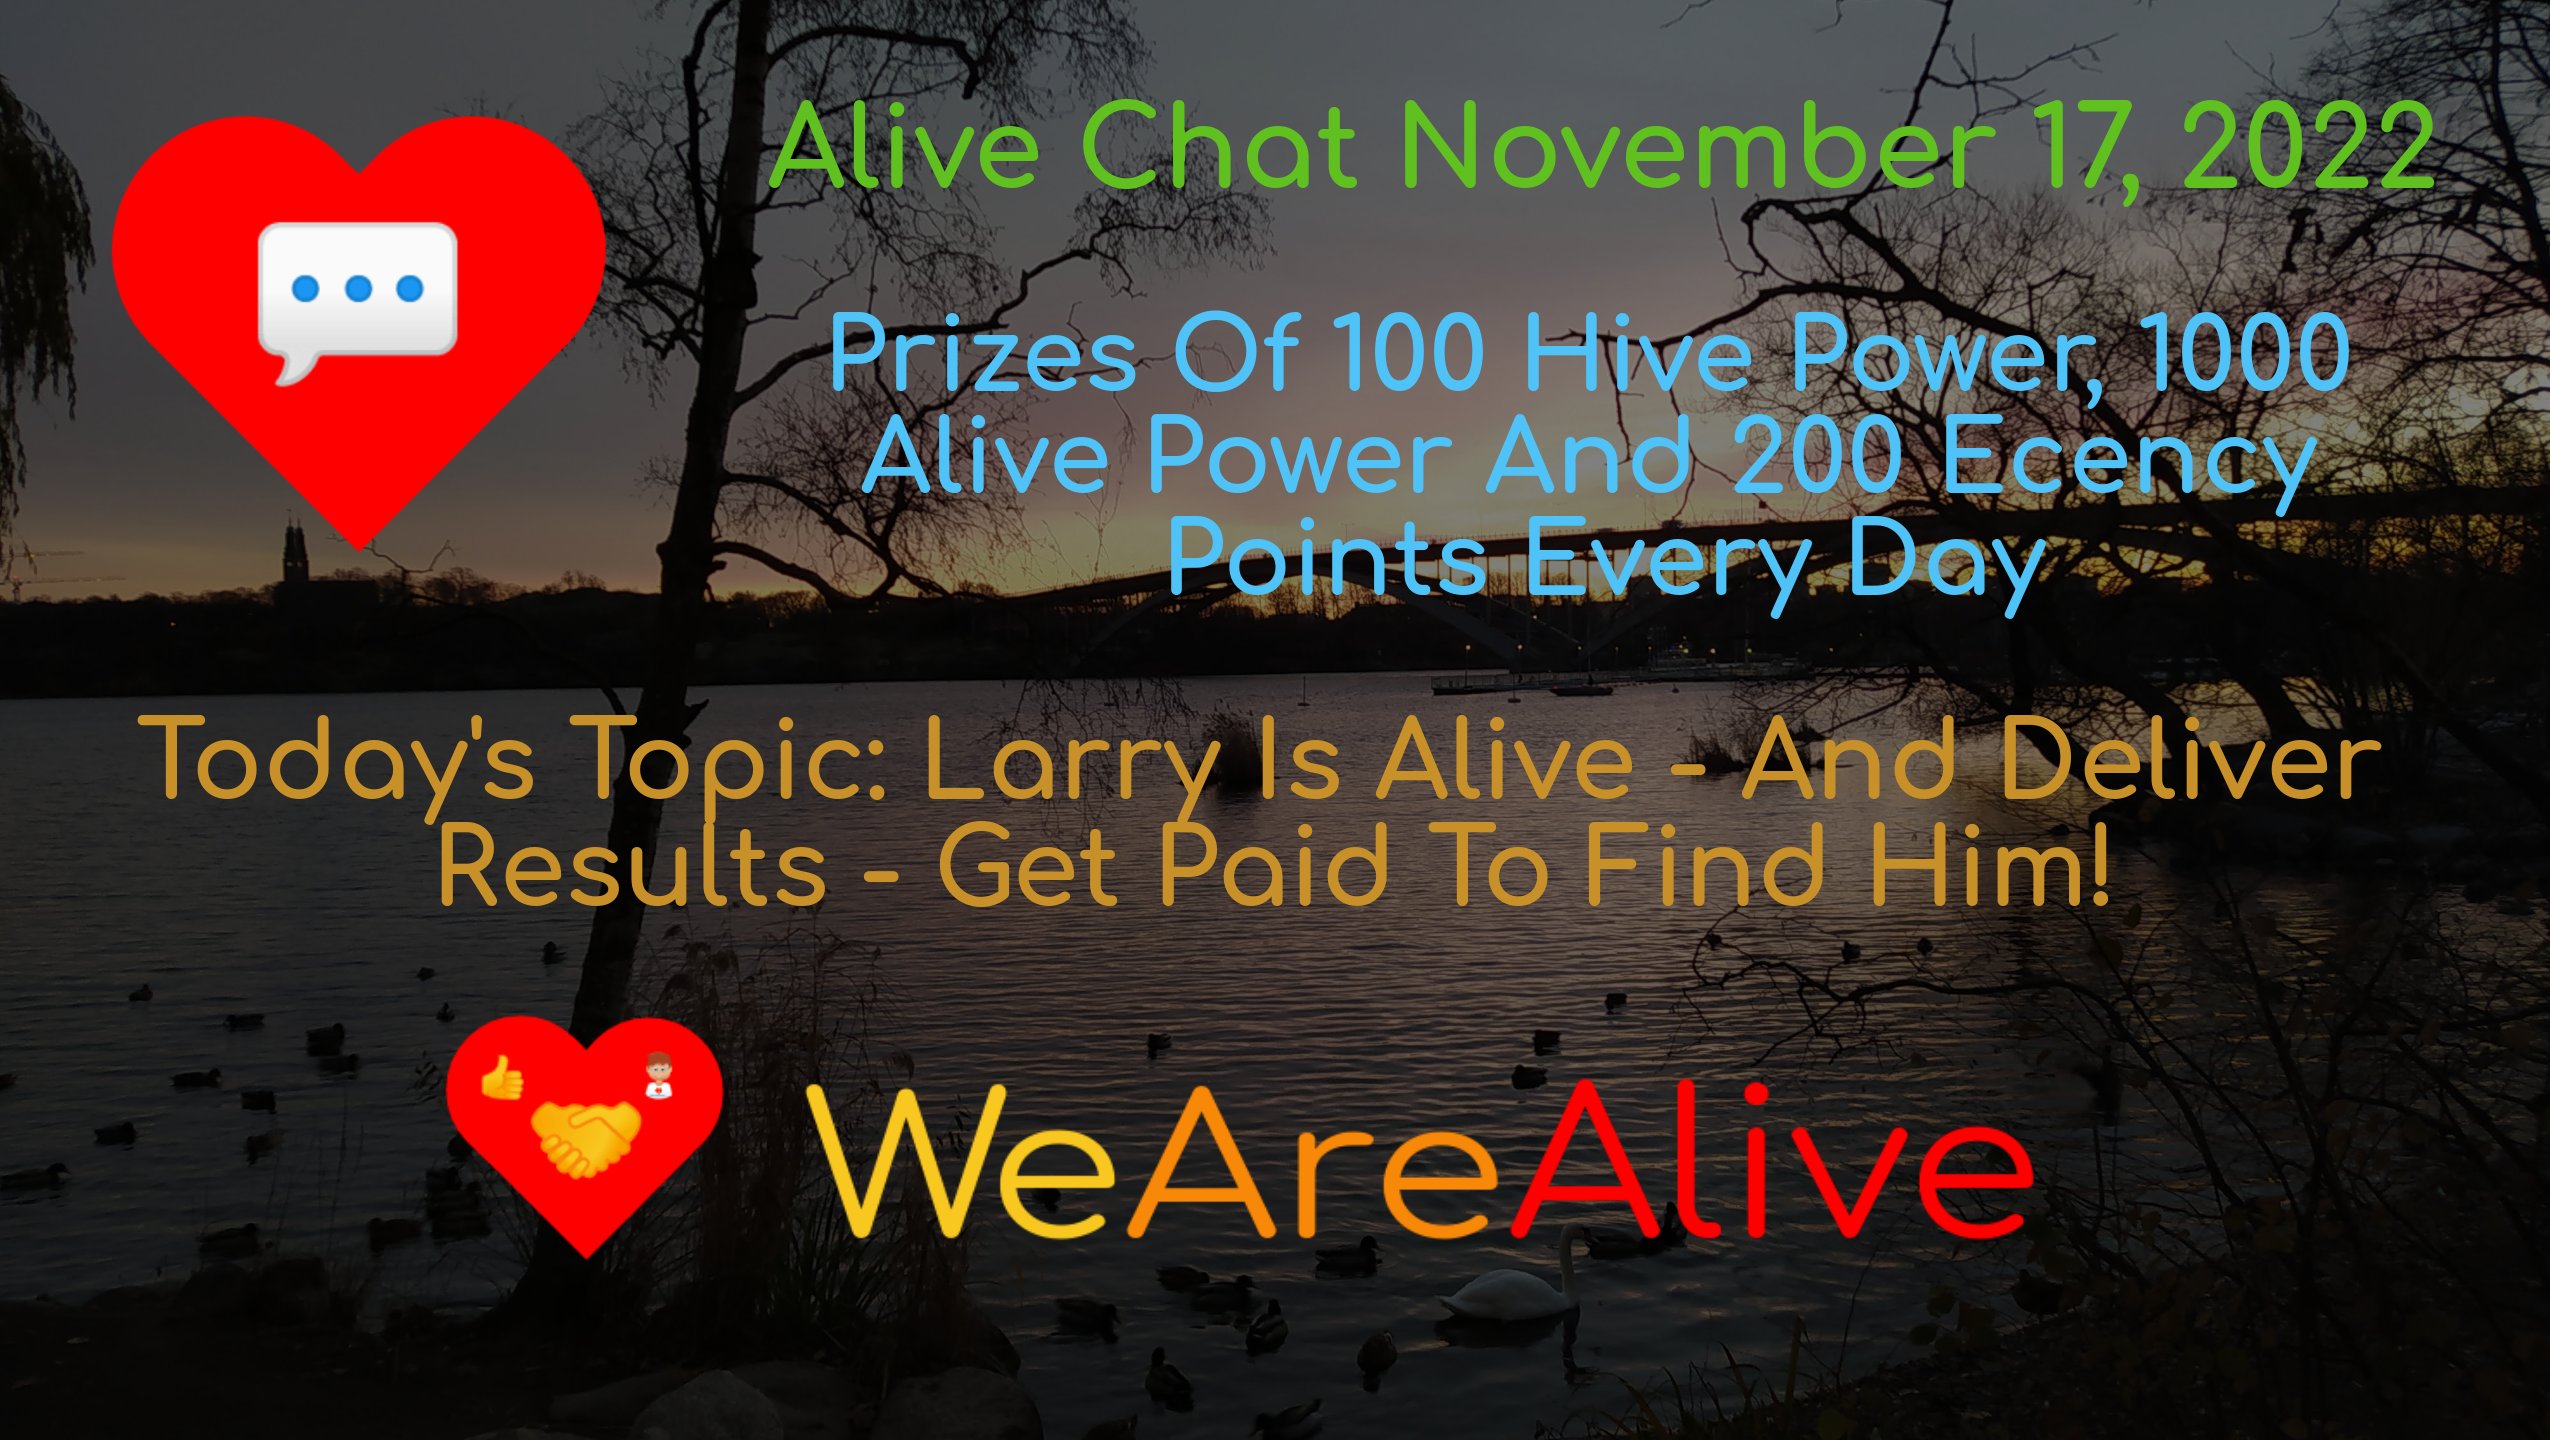 @alive.chat/alive-chat-november-16-2022-daily-prize-drawing-open-for-entries-todays-topic-larry-is-alive-and-deliver-results-get-paid-to-f